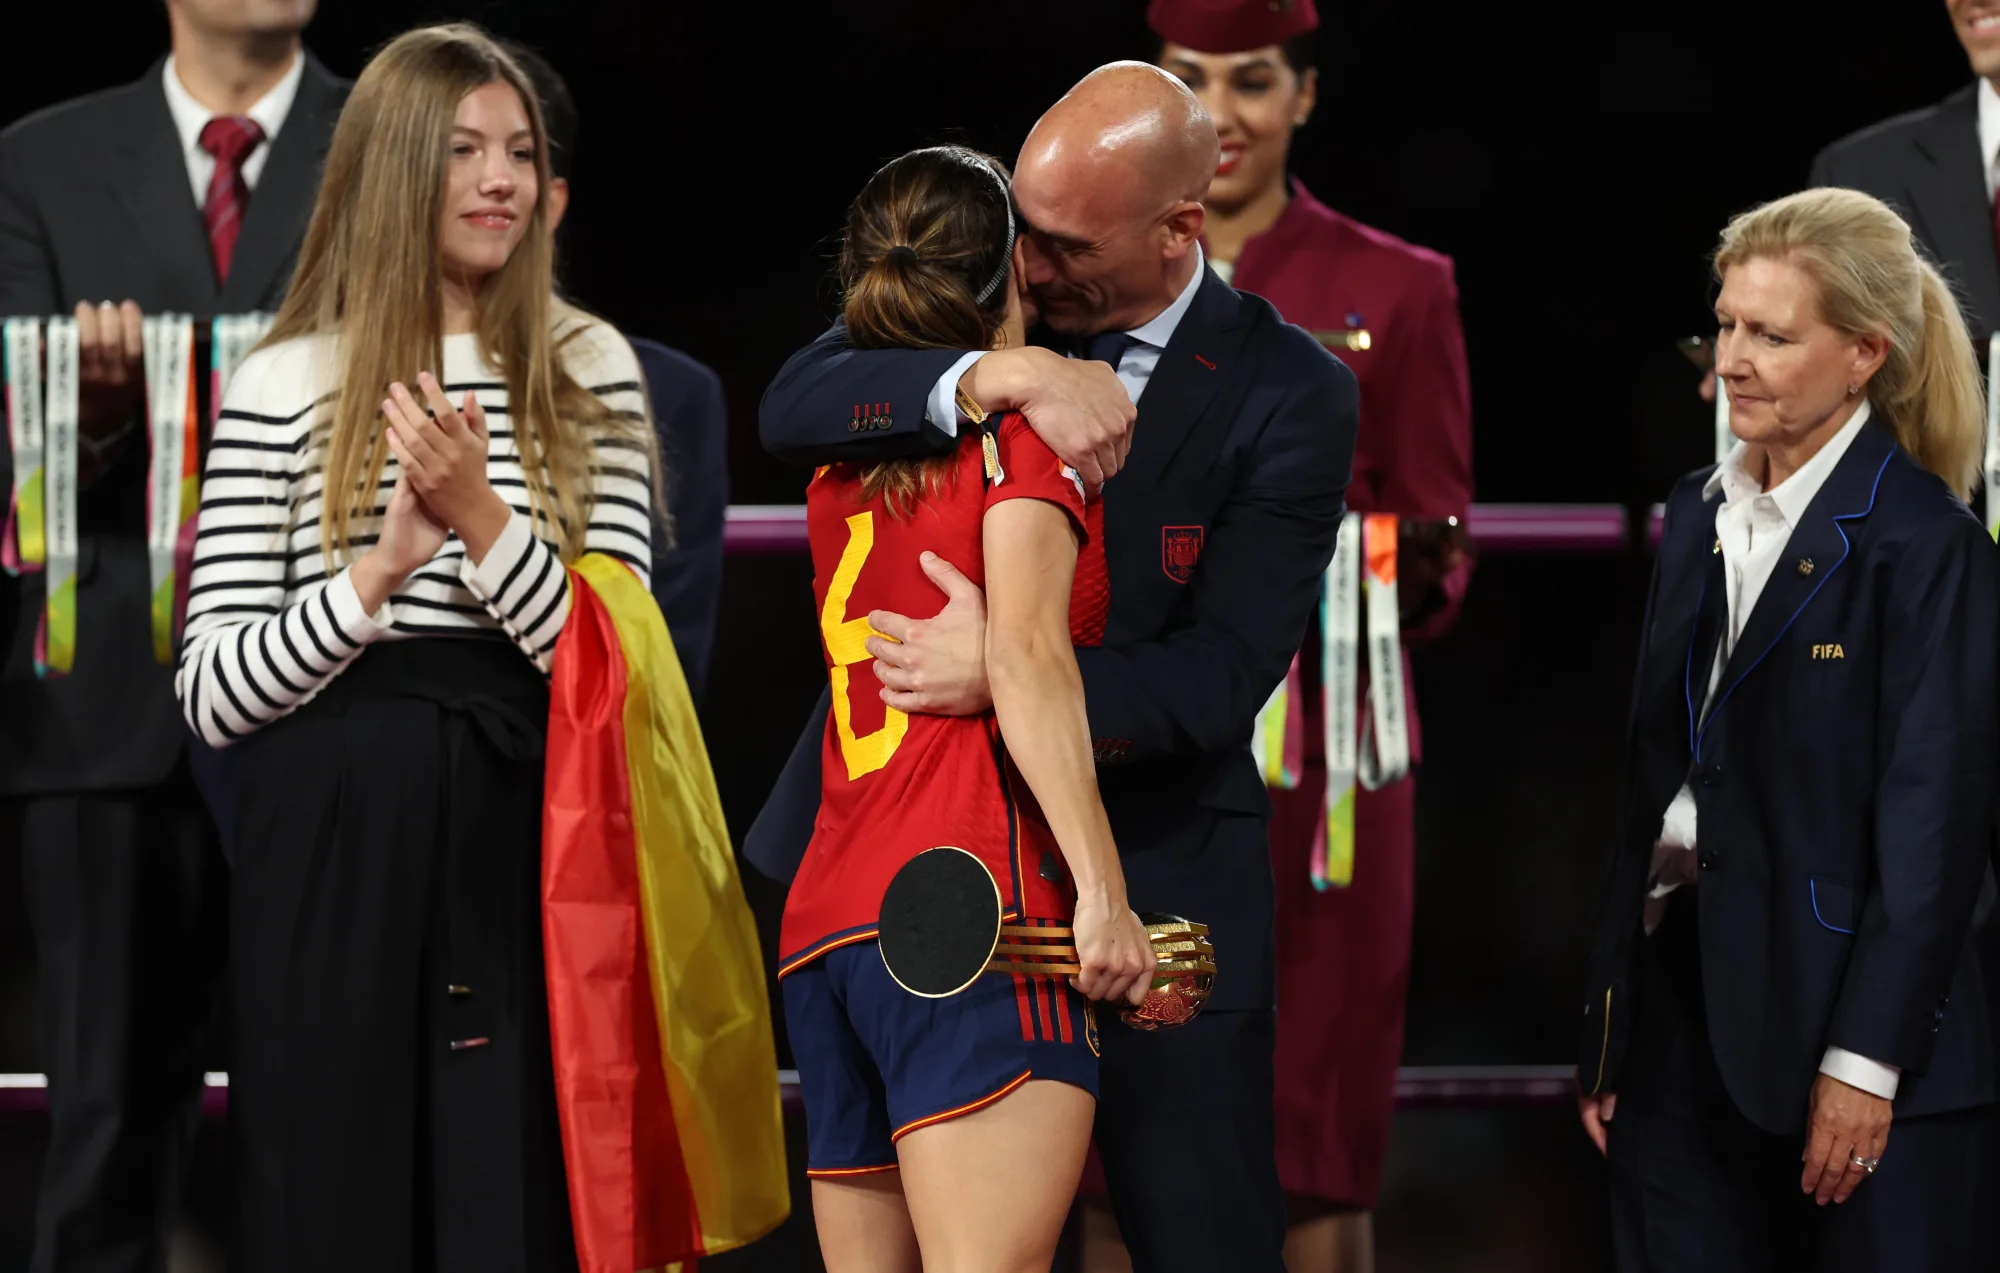 Spanish Football Federation President Accused of Non Consensual Kiss